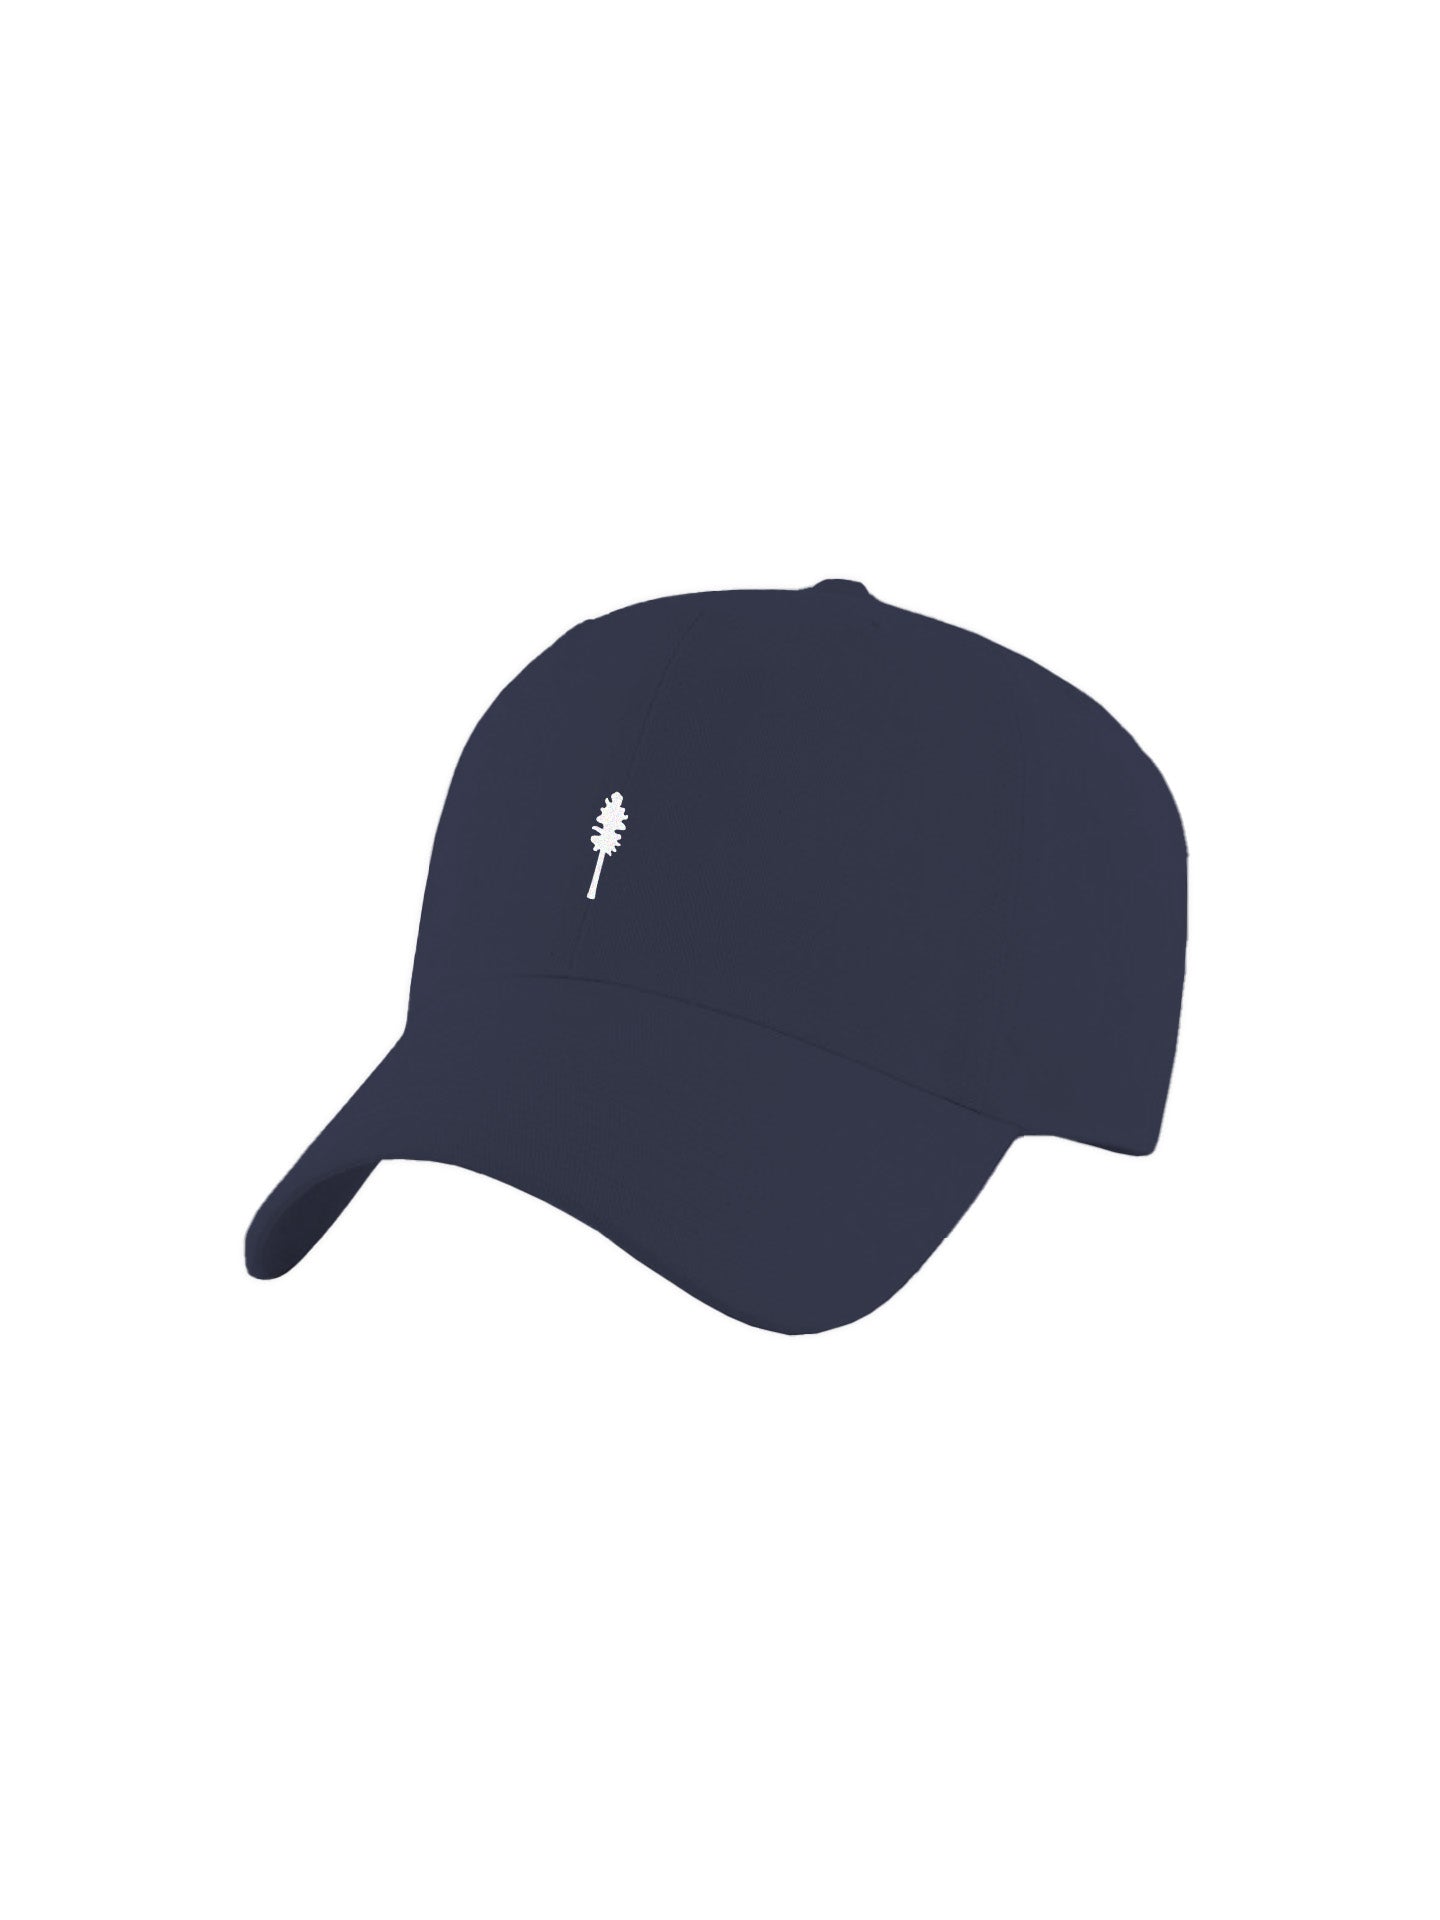 The Hat - Navy Blue